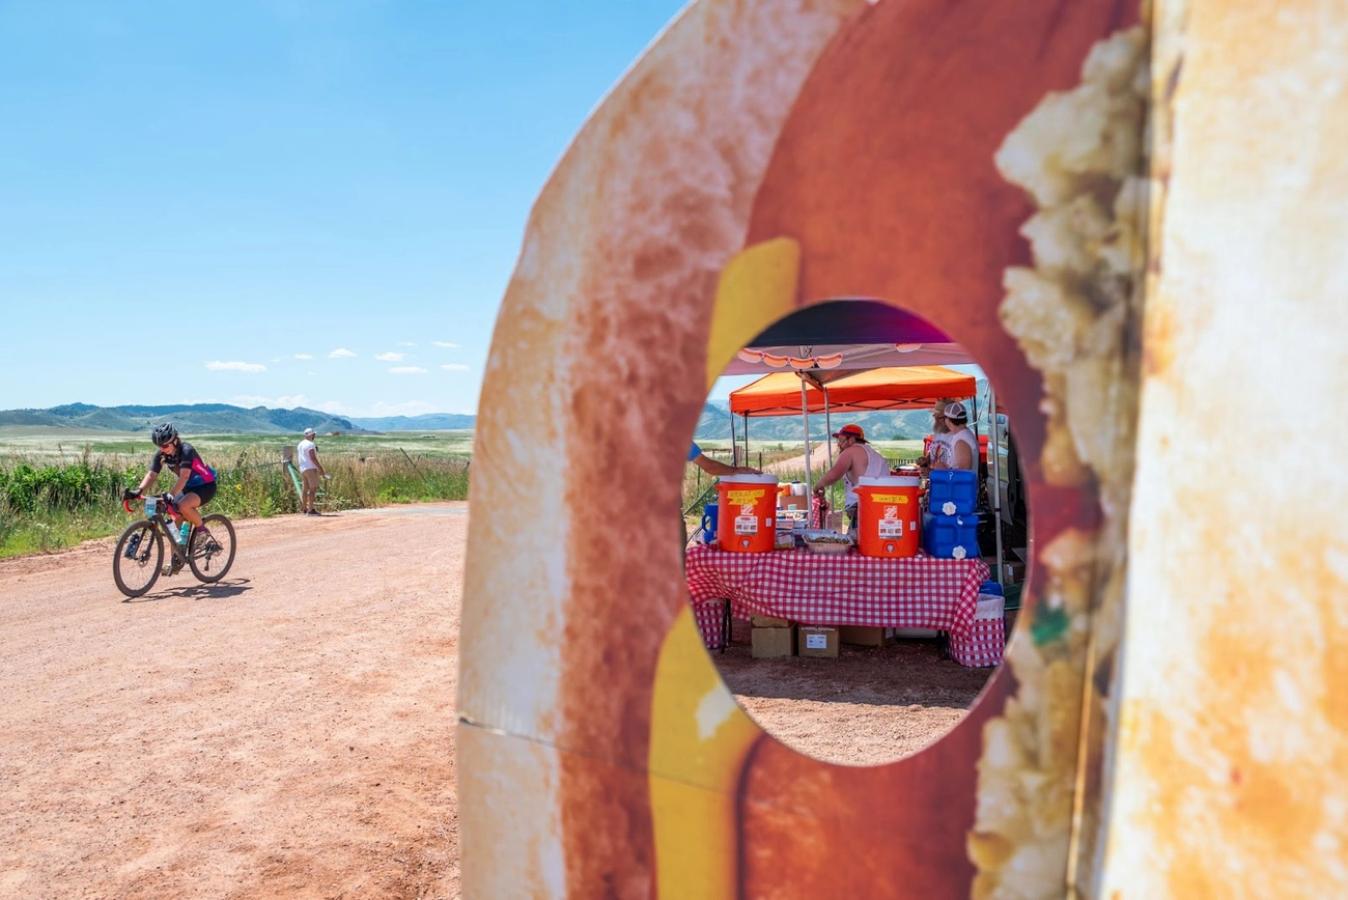 A hot dog themed aid station awaits riders at mile 50, right in time for the huge climb up to 8,000 feet. Consume if you dare